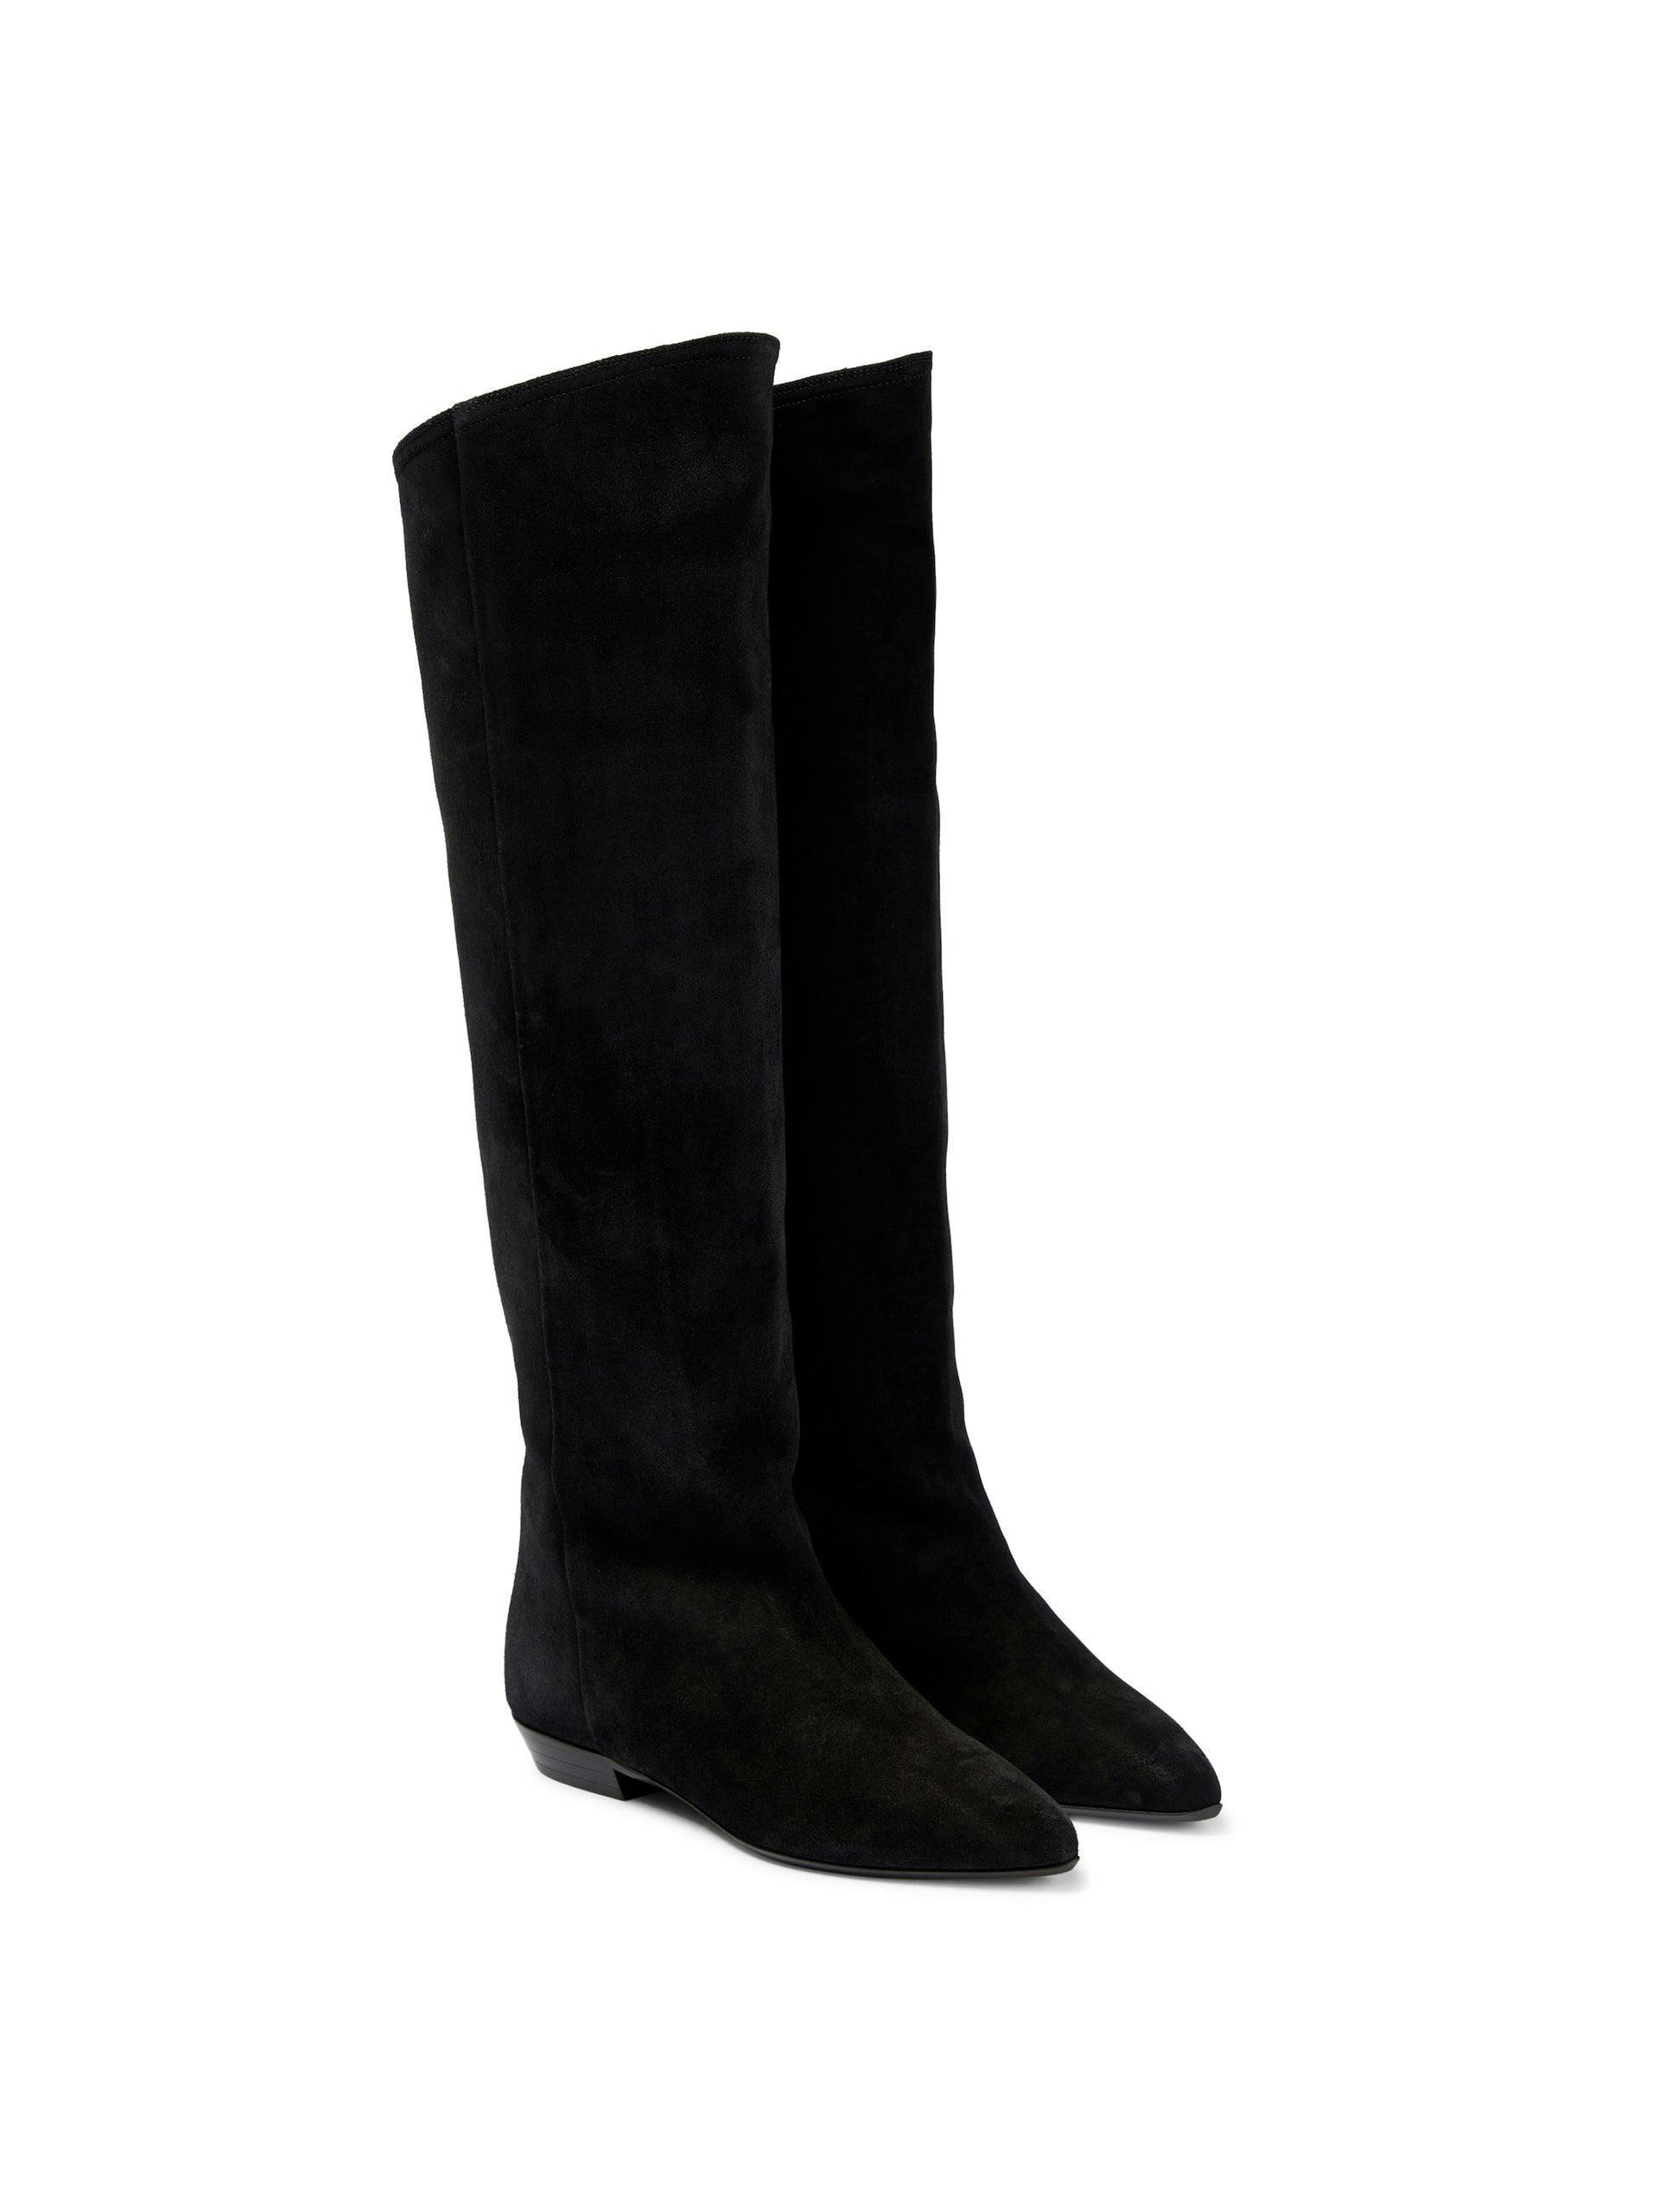 Black suede knee-high boots